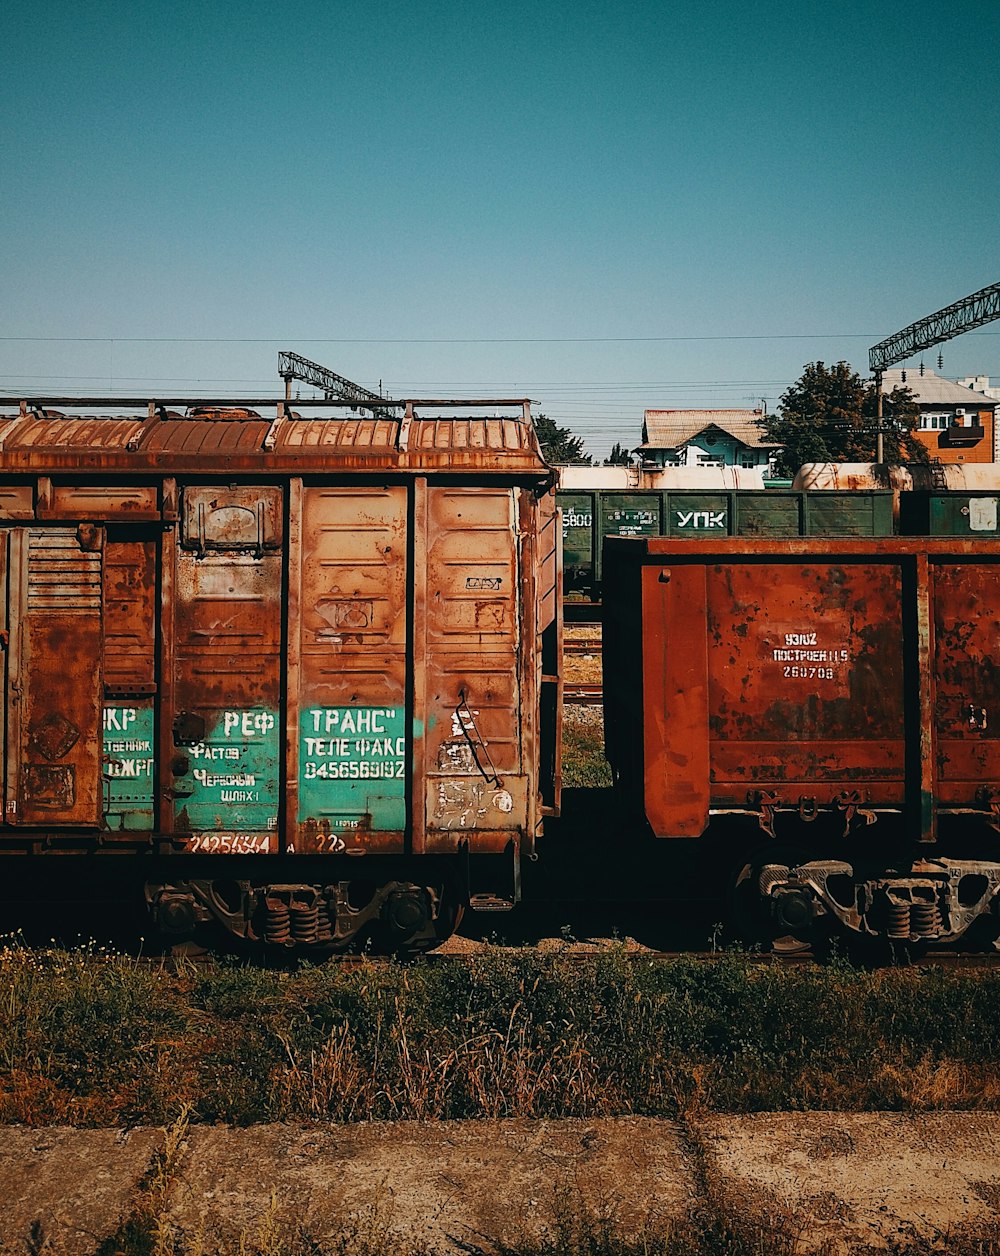 brown train intermodal containers under a calm blue sky during daytime